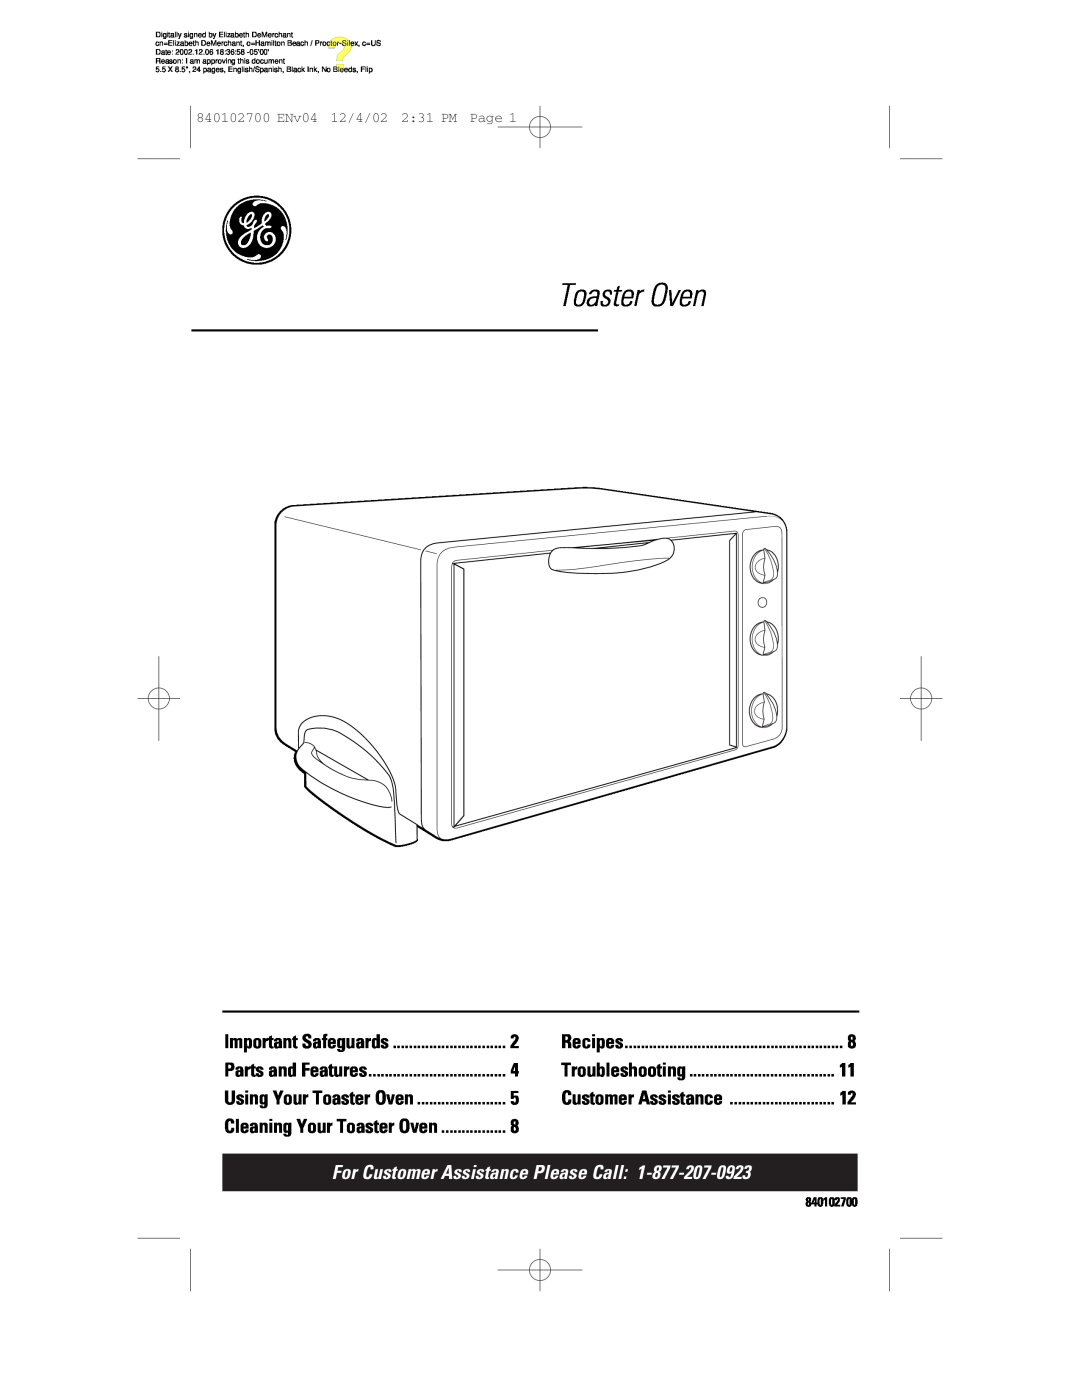 GE 840102700 manual Toaster Oven, For Customer Assistance Please Call, Important Safeguards, Recipes, Parts and Features 